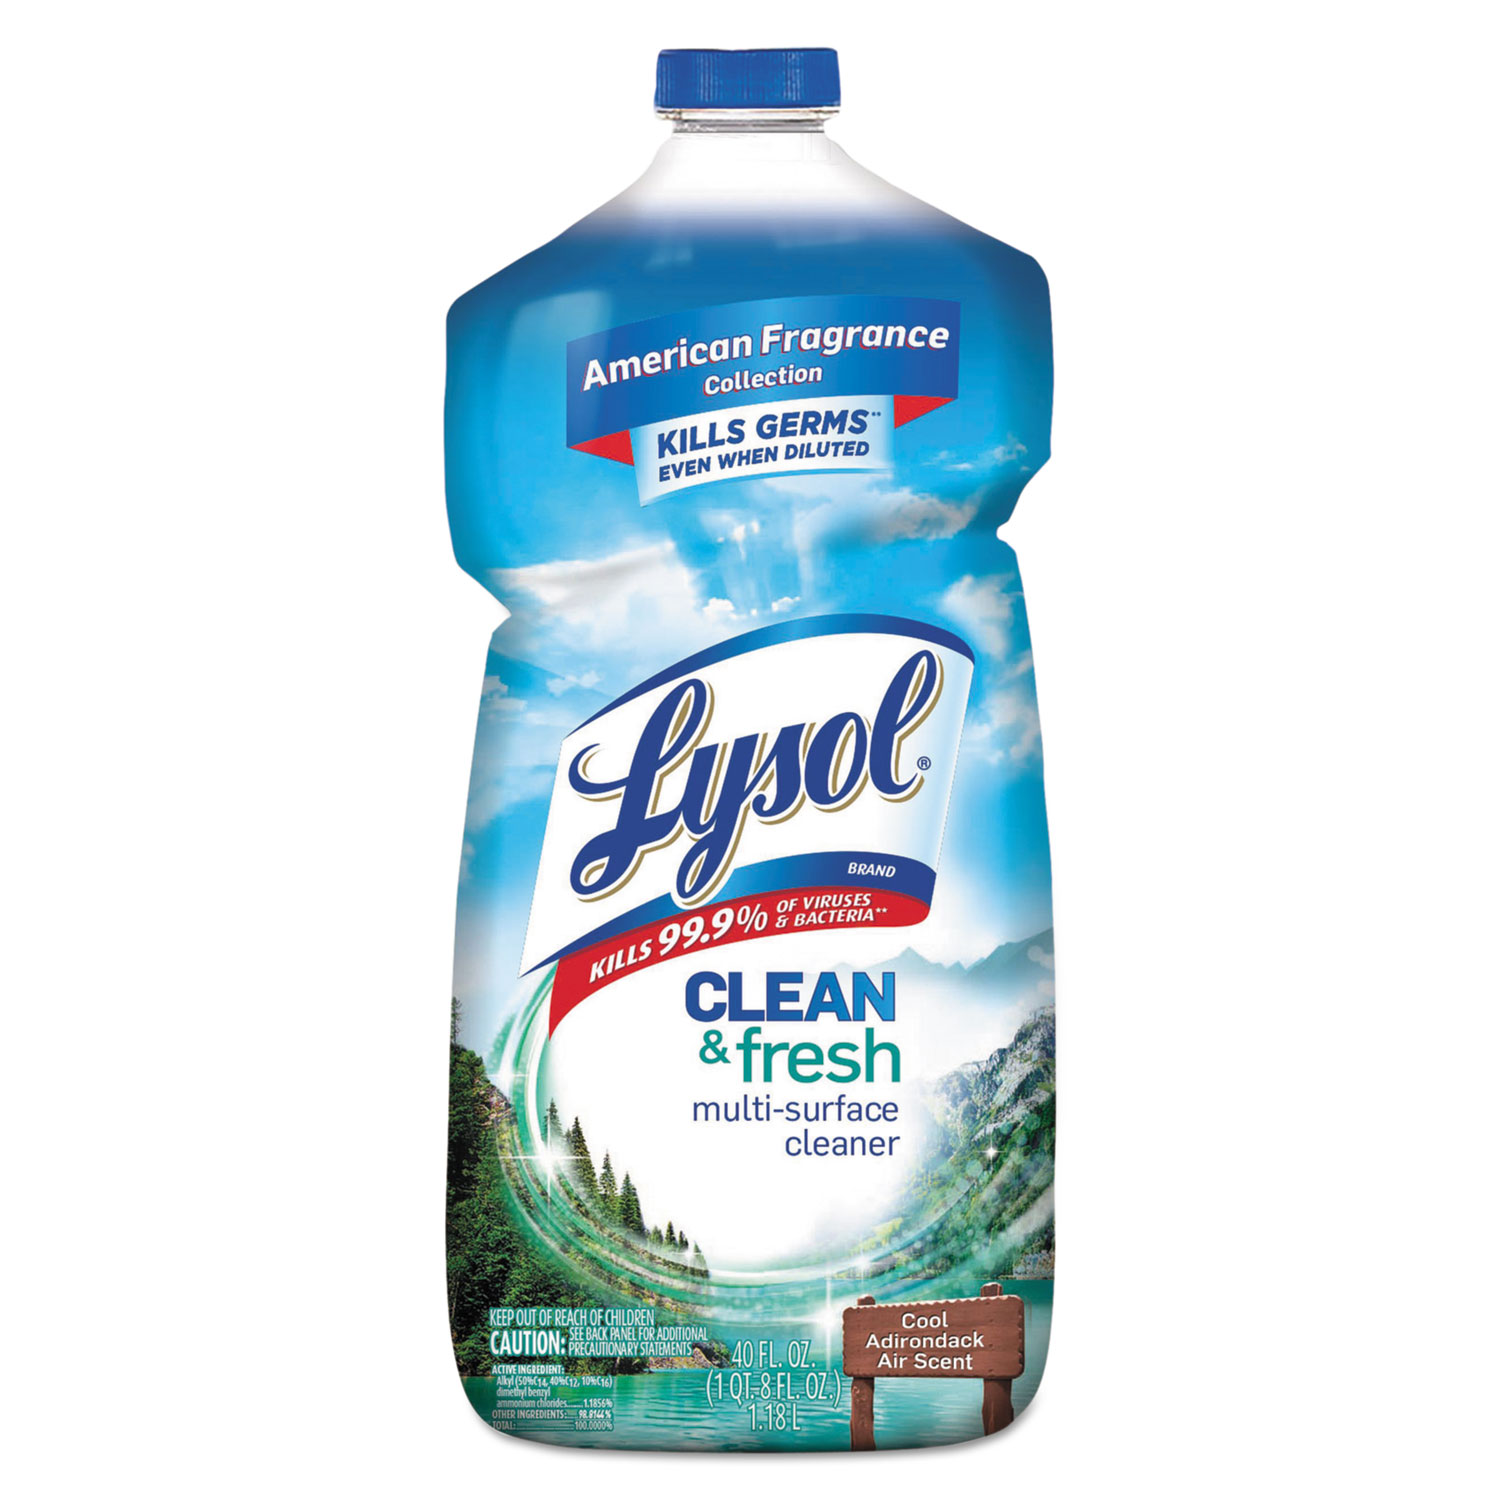  LYSOL Brand 19200-78630 Clean and Fresh Multi-Surface Cleaner, Cool Adirondack Air, 40 oz Bottle (RAC78630CT) 